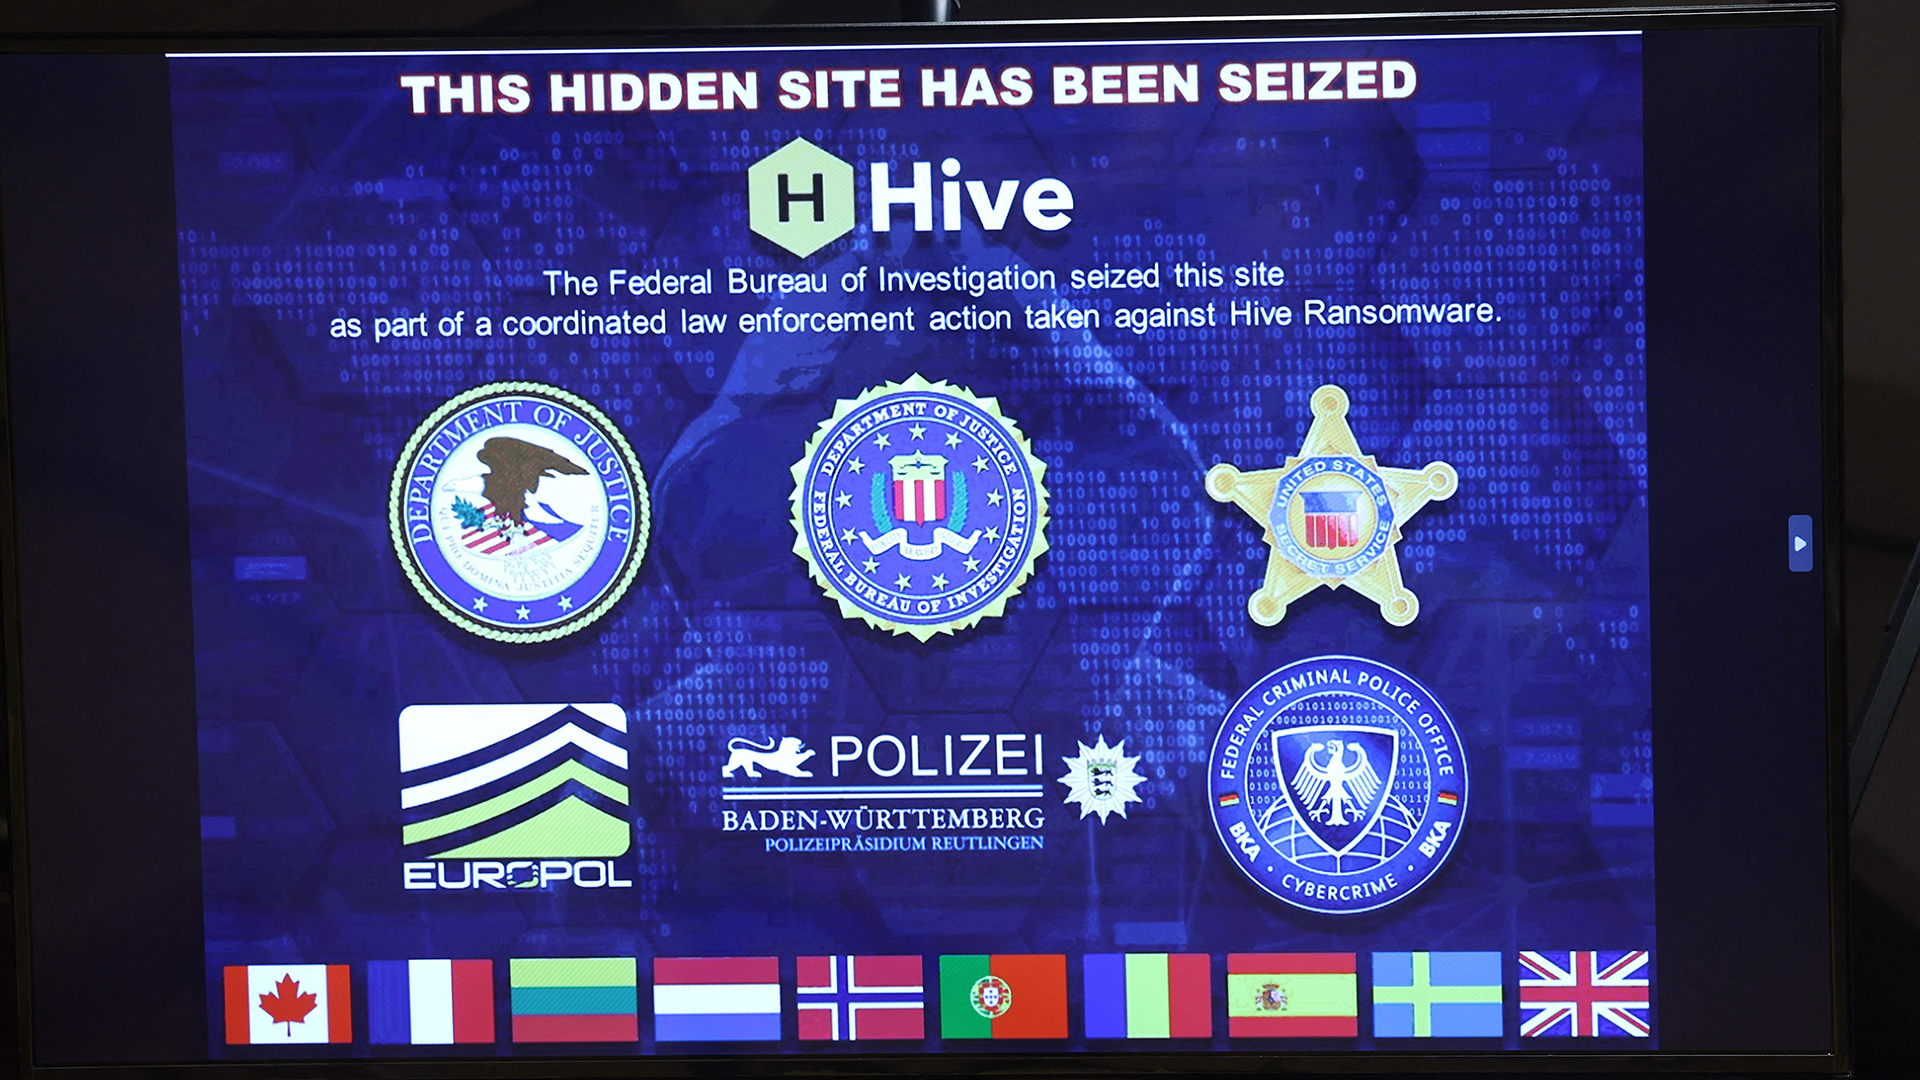 Germany and the United States of America: Hacking the “Hive” Hacker Network